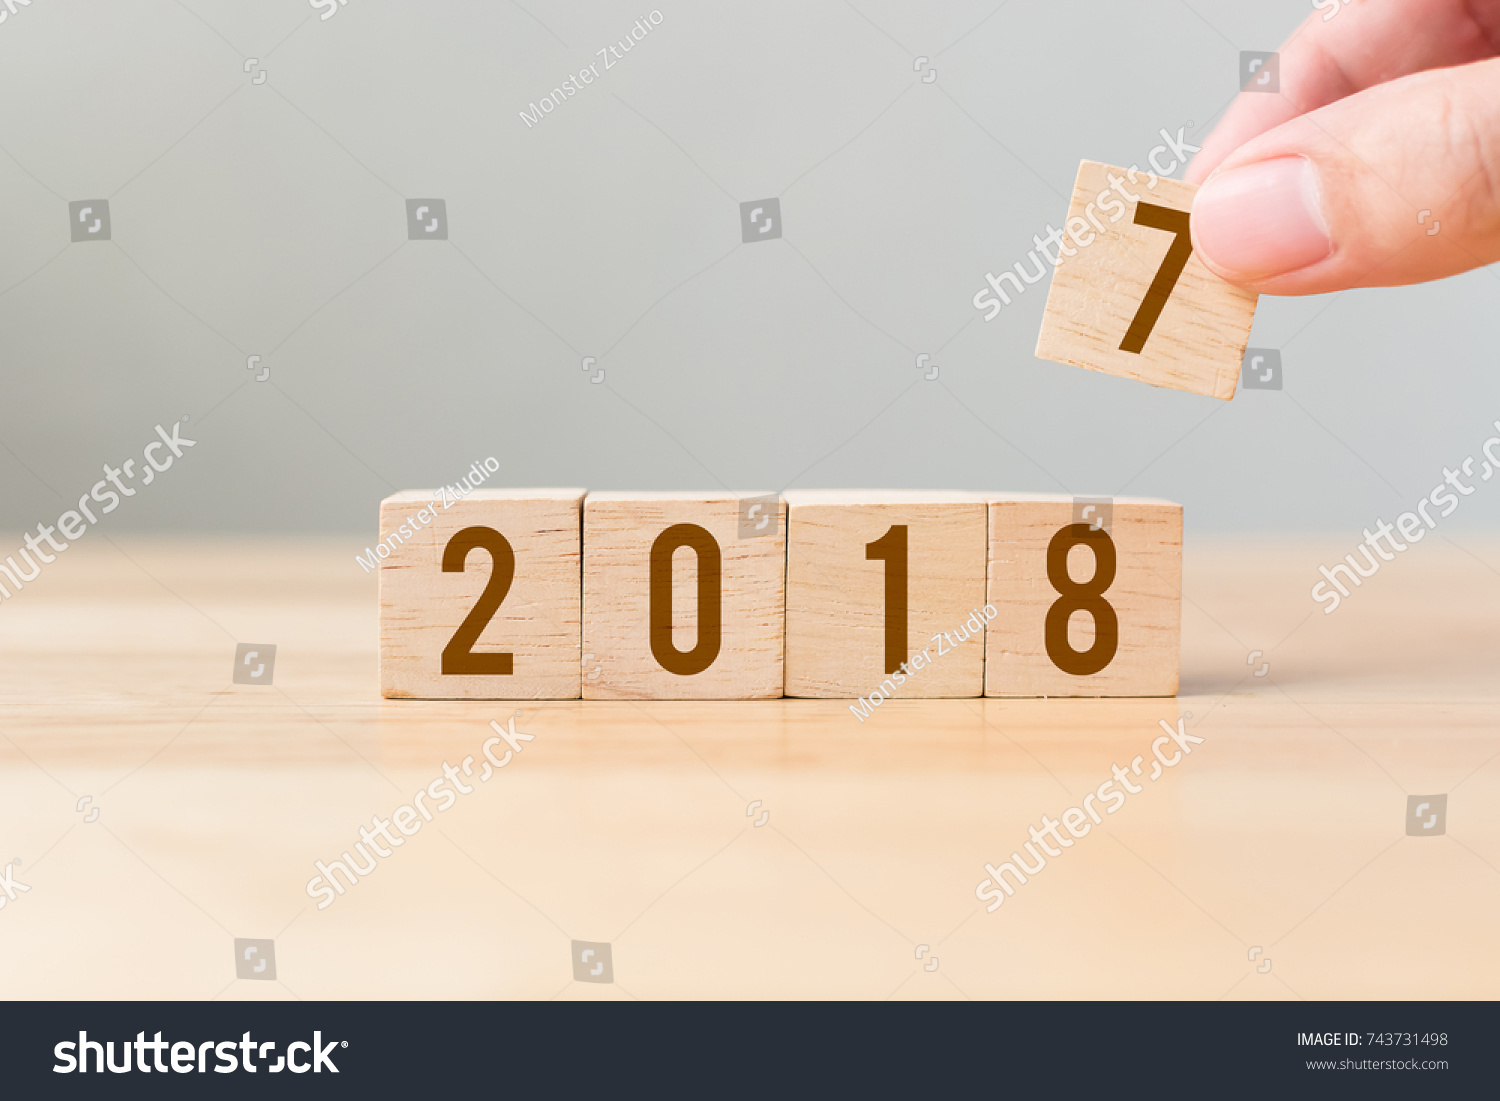 New year 2017 change to 2018 concept, Hand putting wood cube #743731498